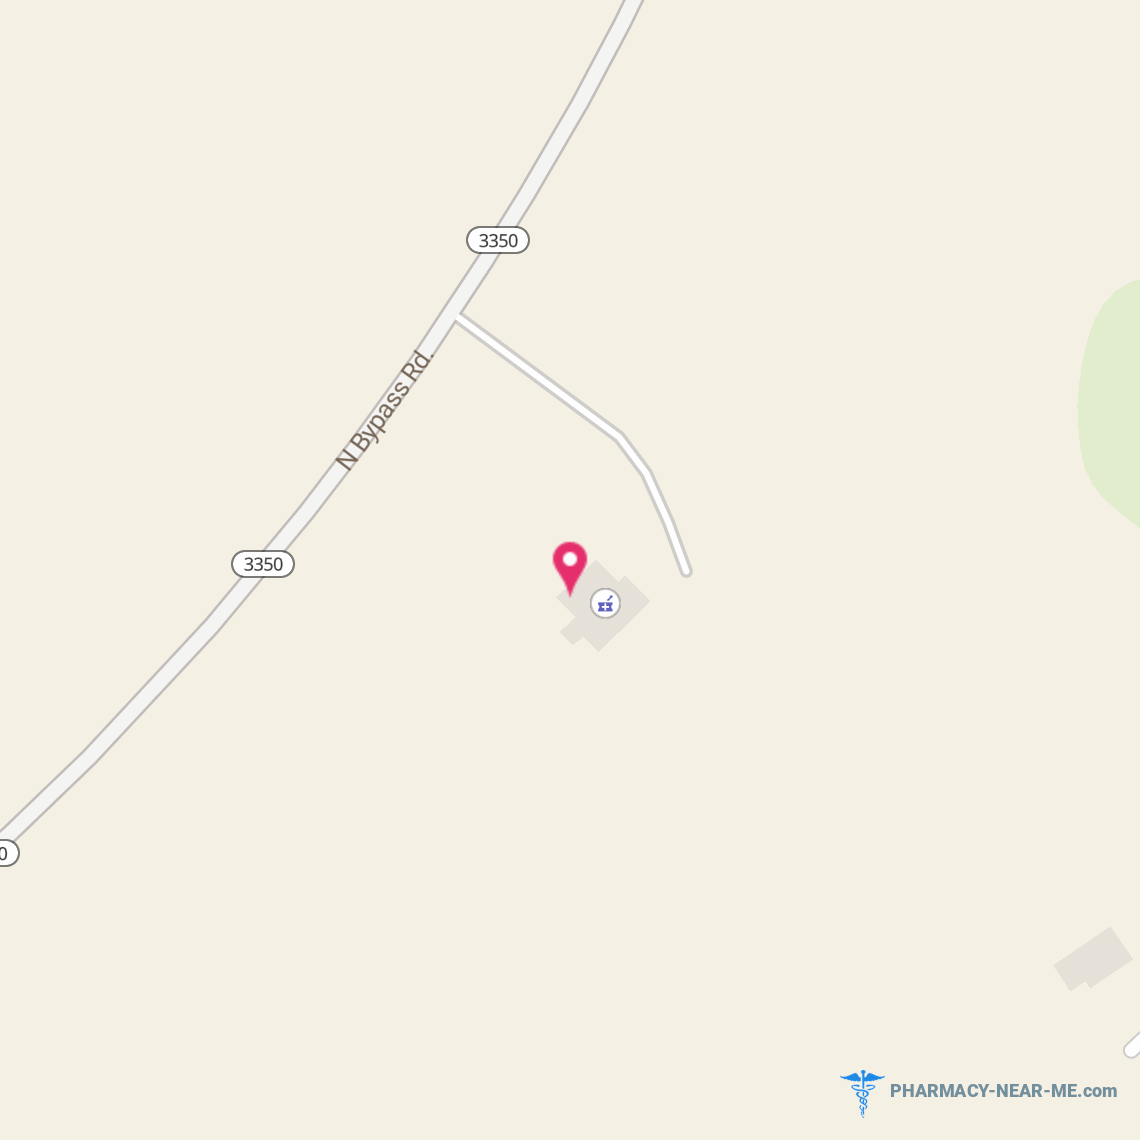 EASTRIDGE-PHELPS PHARMACY LLC - Pharmacy Hours, Phone, Reviews & Information: 500 North Bypass Road, Campbellsville, Kentucky 42718, United States